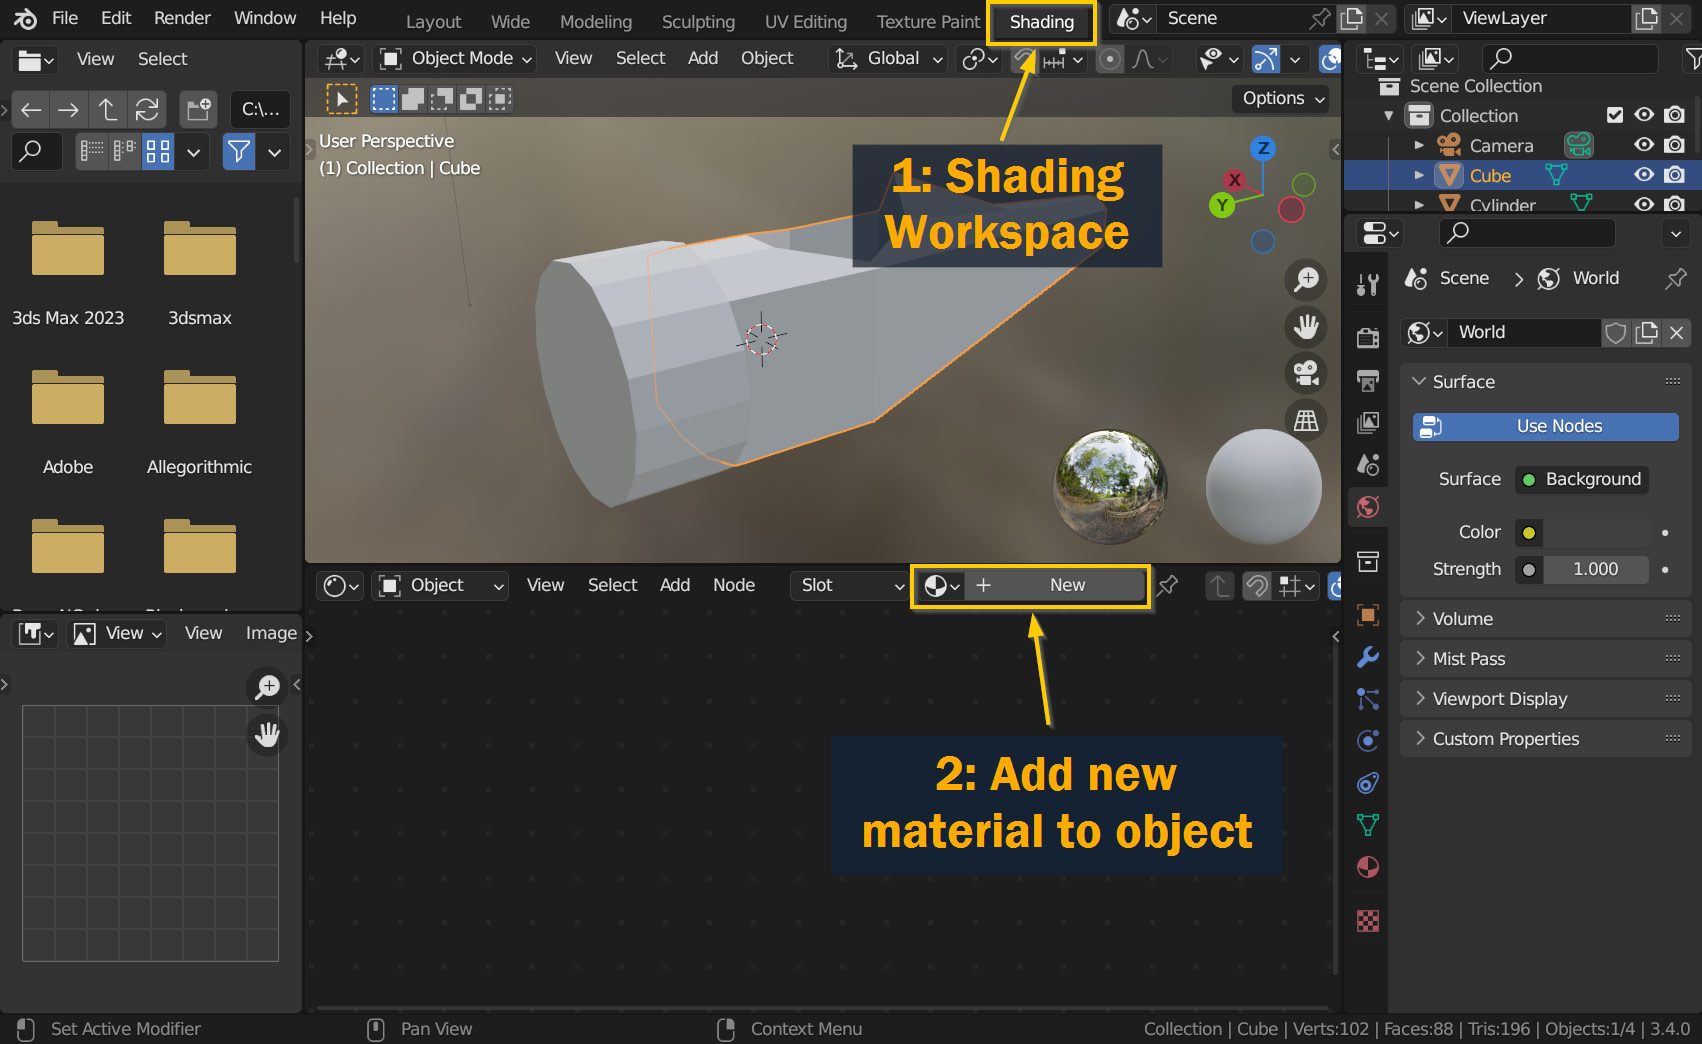 Opening the Shading workspace and creating a new material